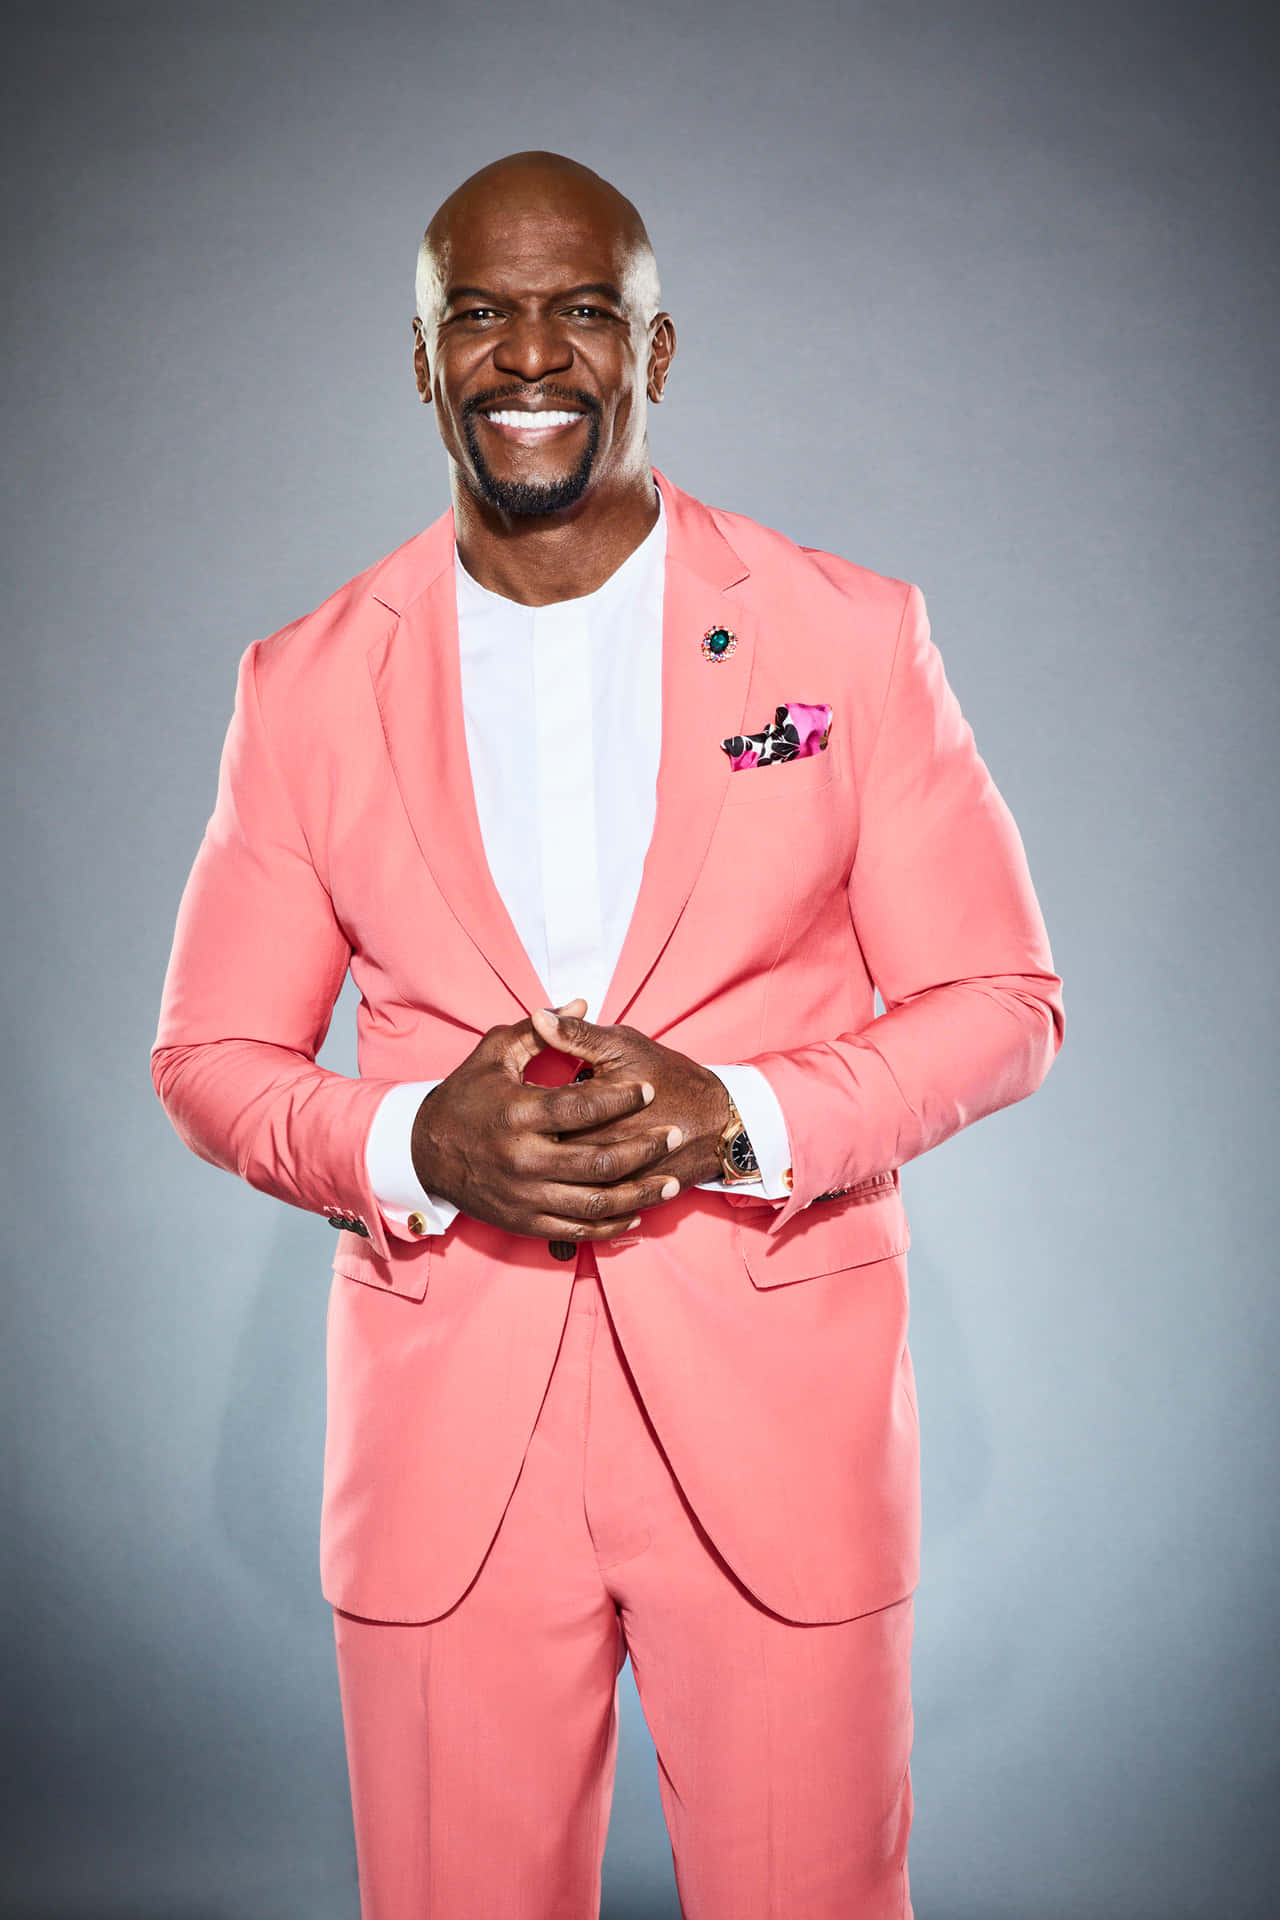 Actor Terry Crews strikes an iconic pose Wallpaper